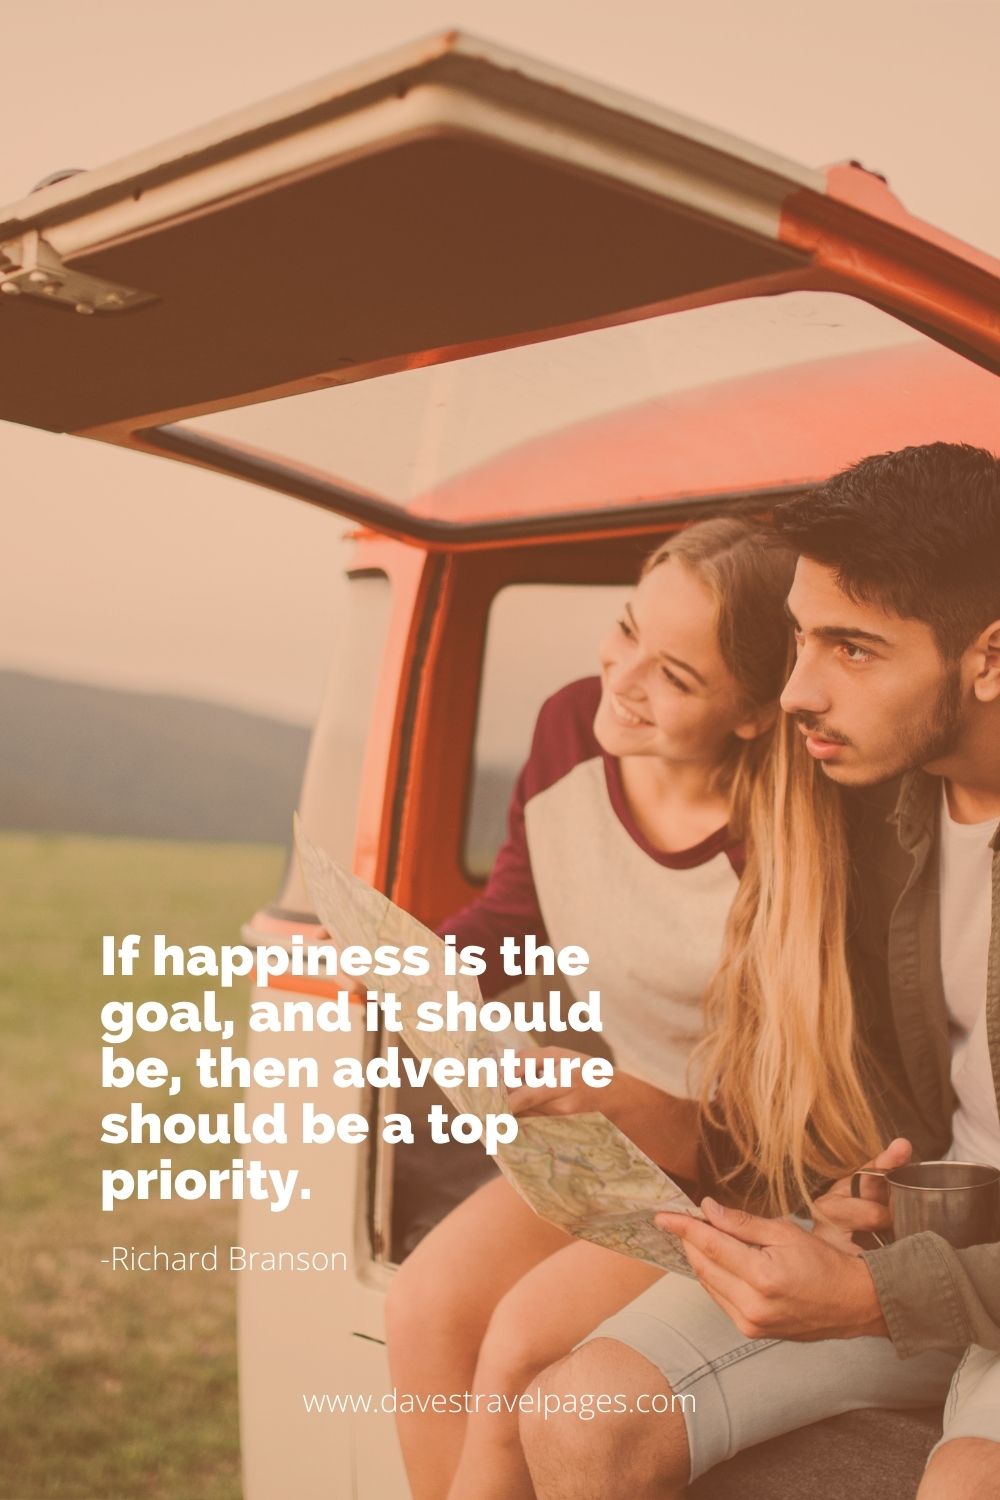 If happiness is the goal, and it should be, then adventure should be a top priority.